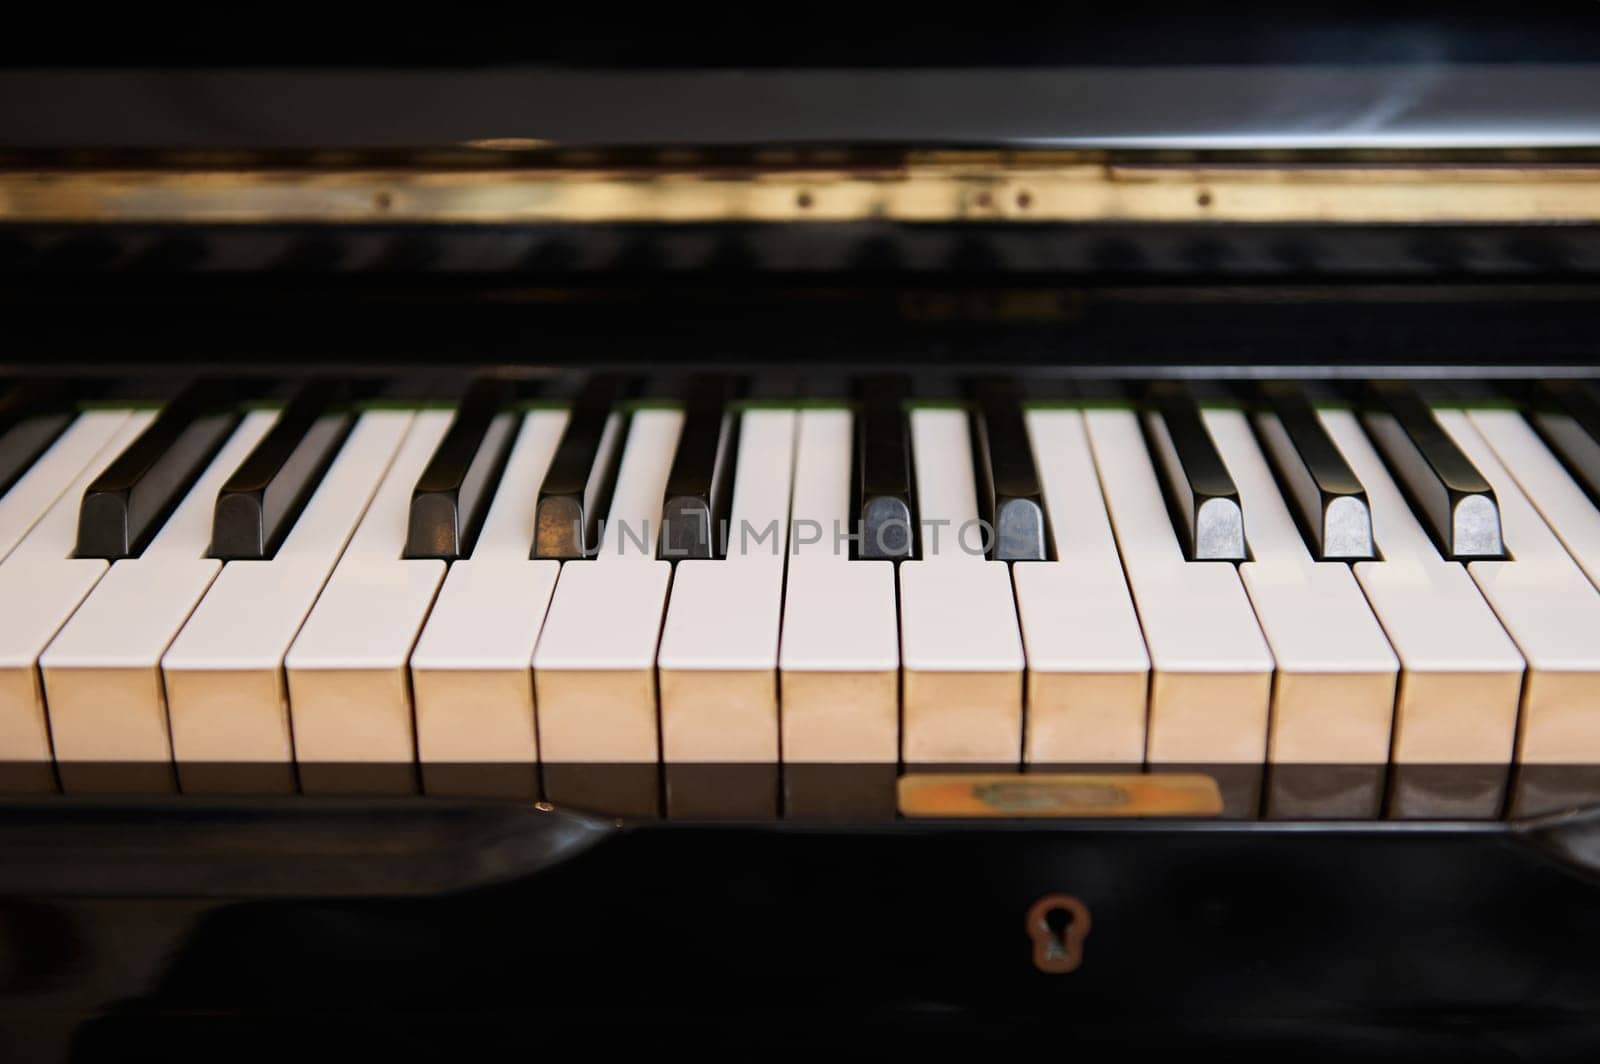 Close-up front view of classic grand piano keyboard. Ebony and ivory pianoforte keys. Chord musical instrument. Still life